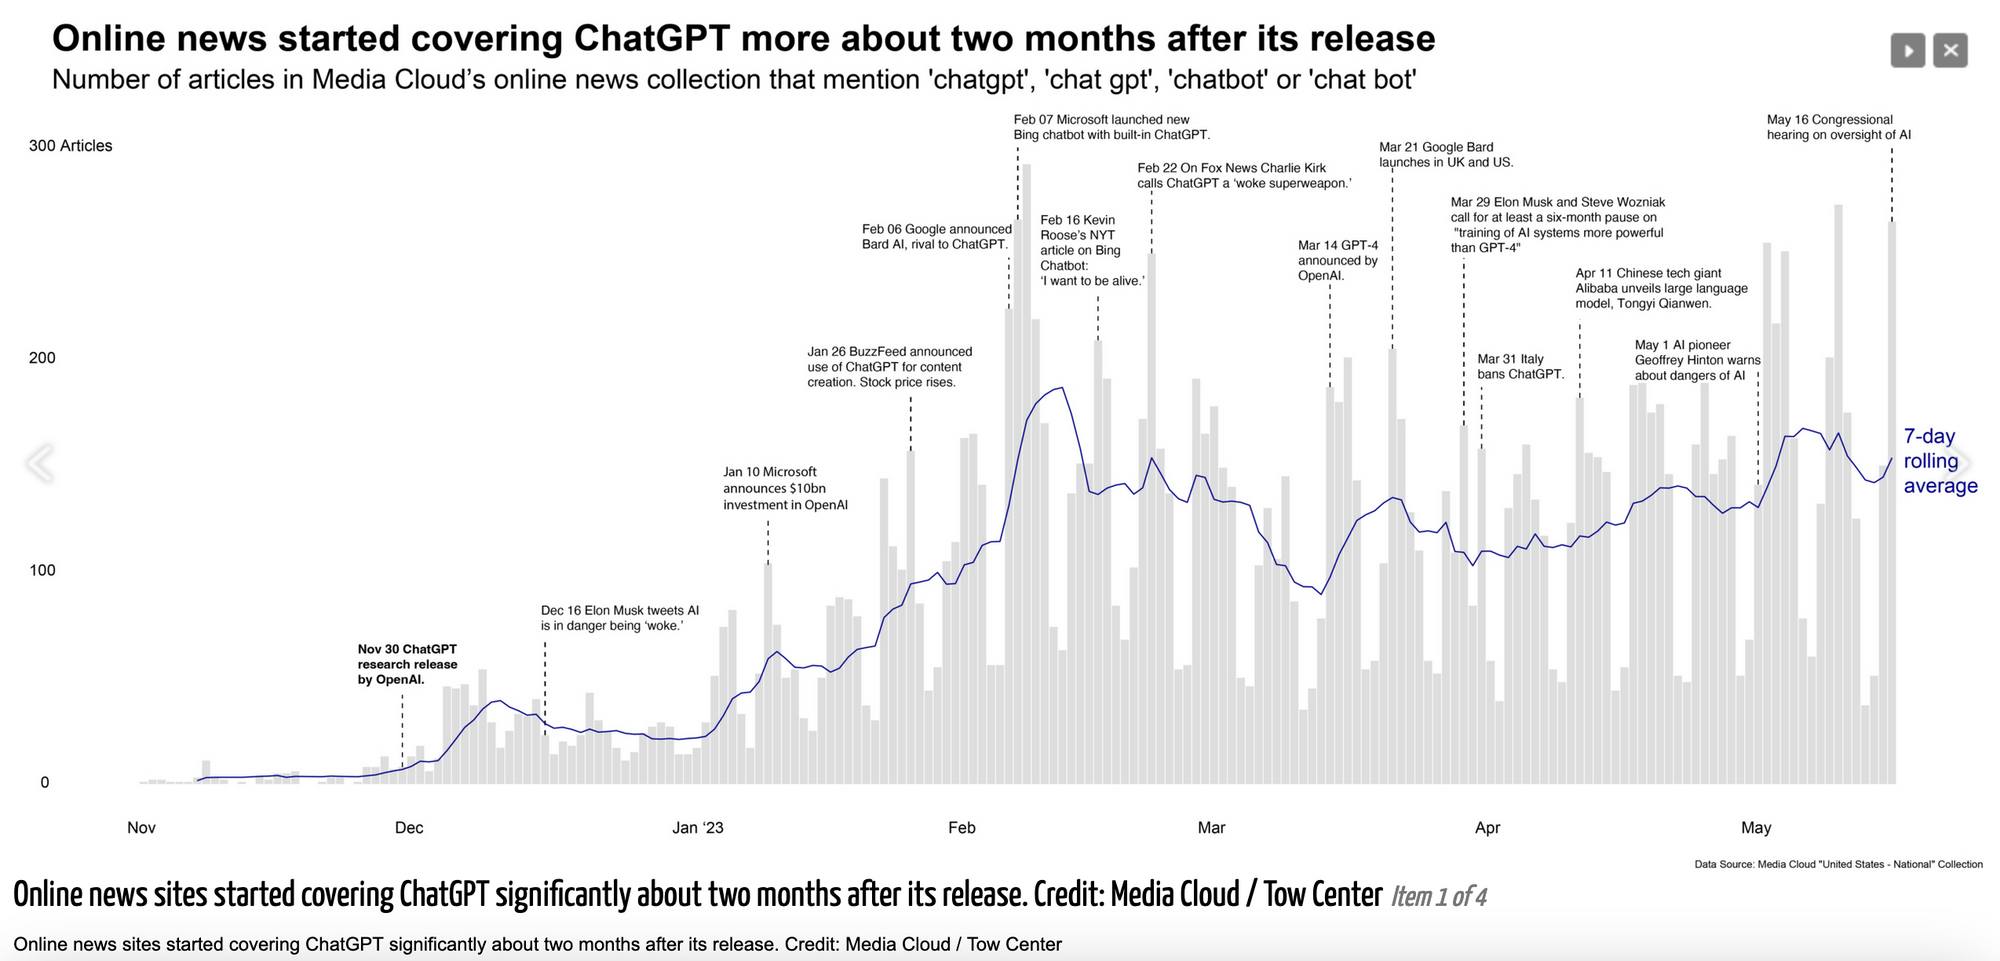 Online news started covering ChatGTP more about two months after its release